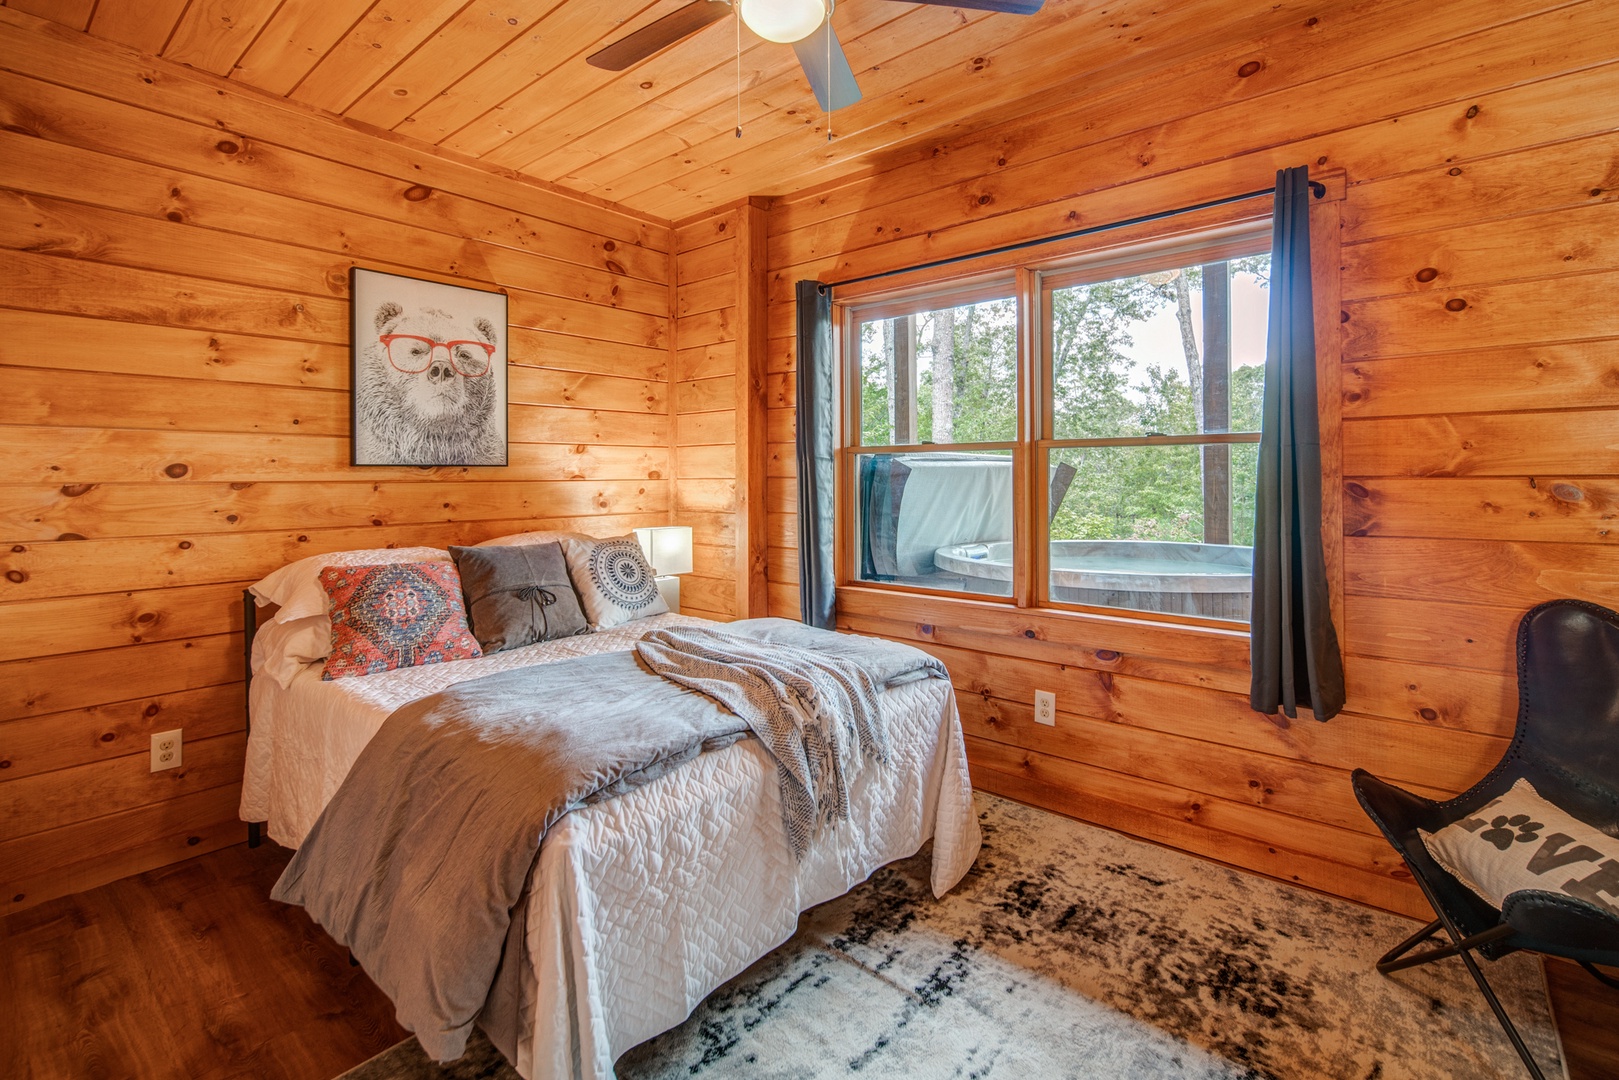 A third bedroom on the lower level includes a full/double bed & ceiling fan